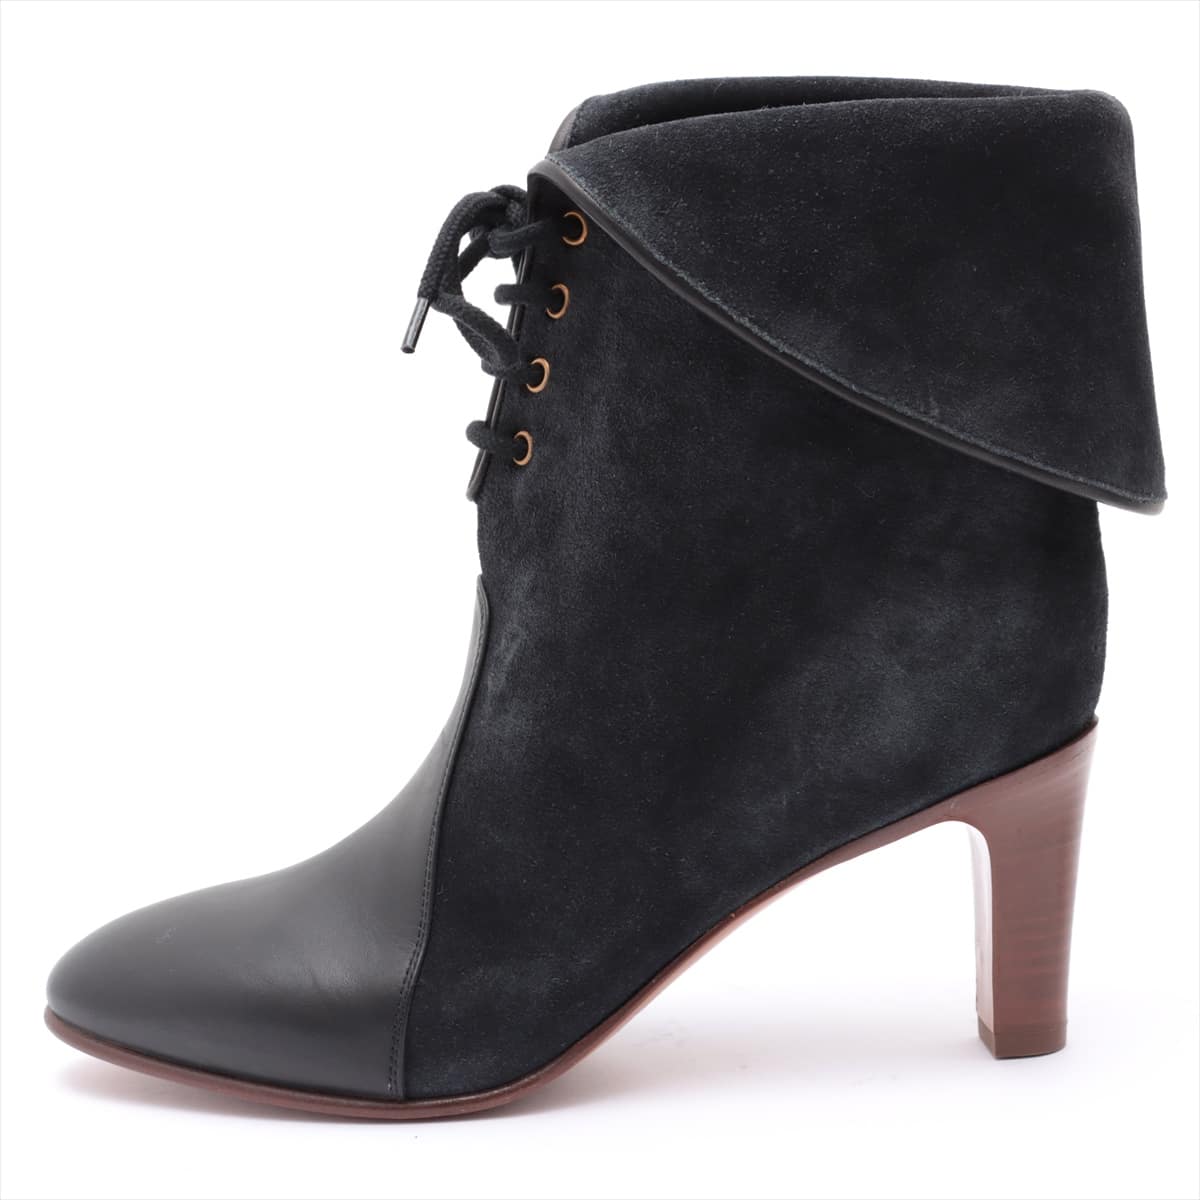 Chloe Suede & leather Short Boots 36 Ladies' Black x Gray